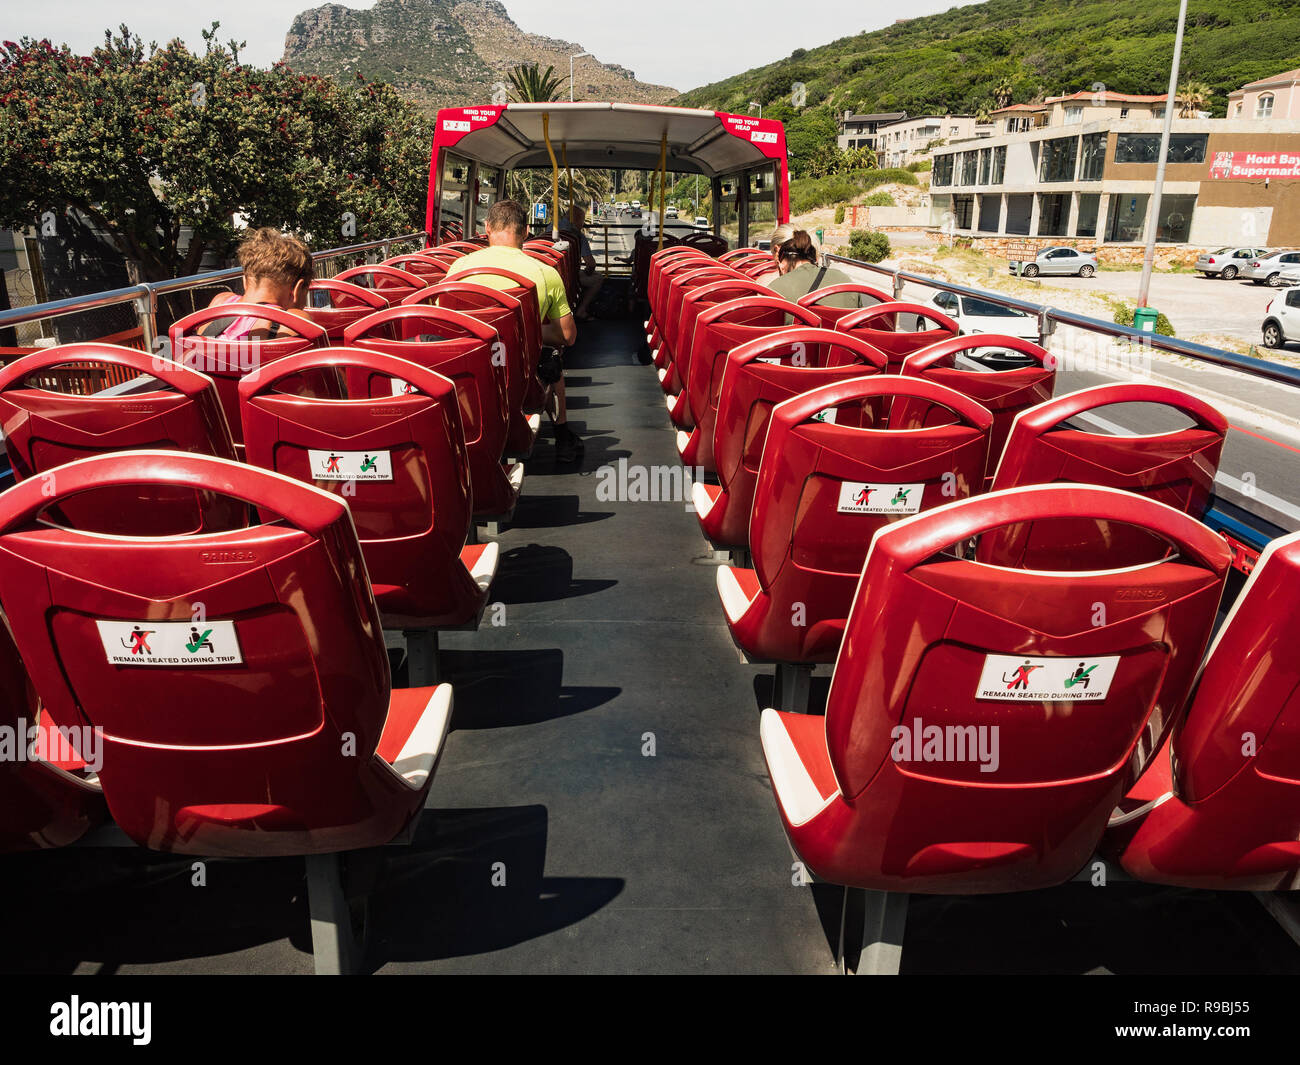 CAPE TOWN, SOUTH AFRICA -DEC 14, 2018. Cape Town City Tours - Hop on hop off tour bus that travels through the city and along the coastlines in Cape T Stock Photo